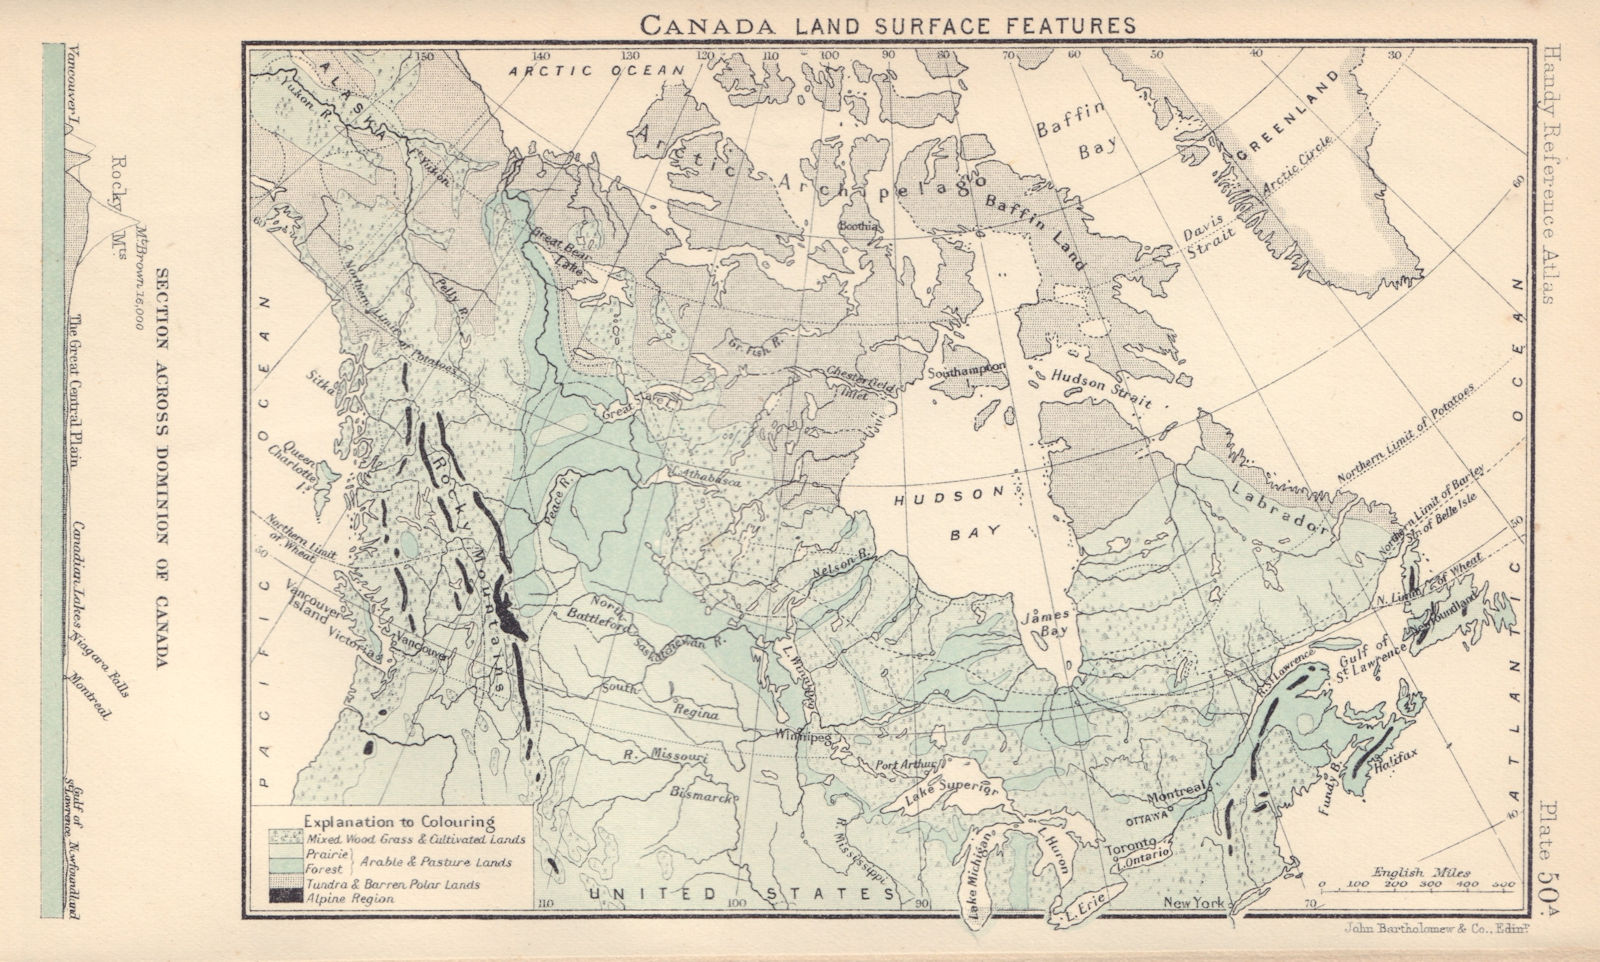 Canada - Land Surface Features. Section across Canada. BARTHOLOMEW 1898 map